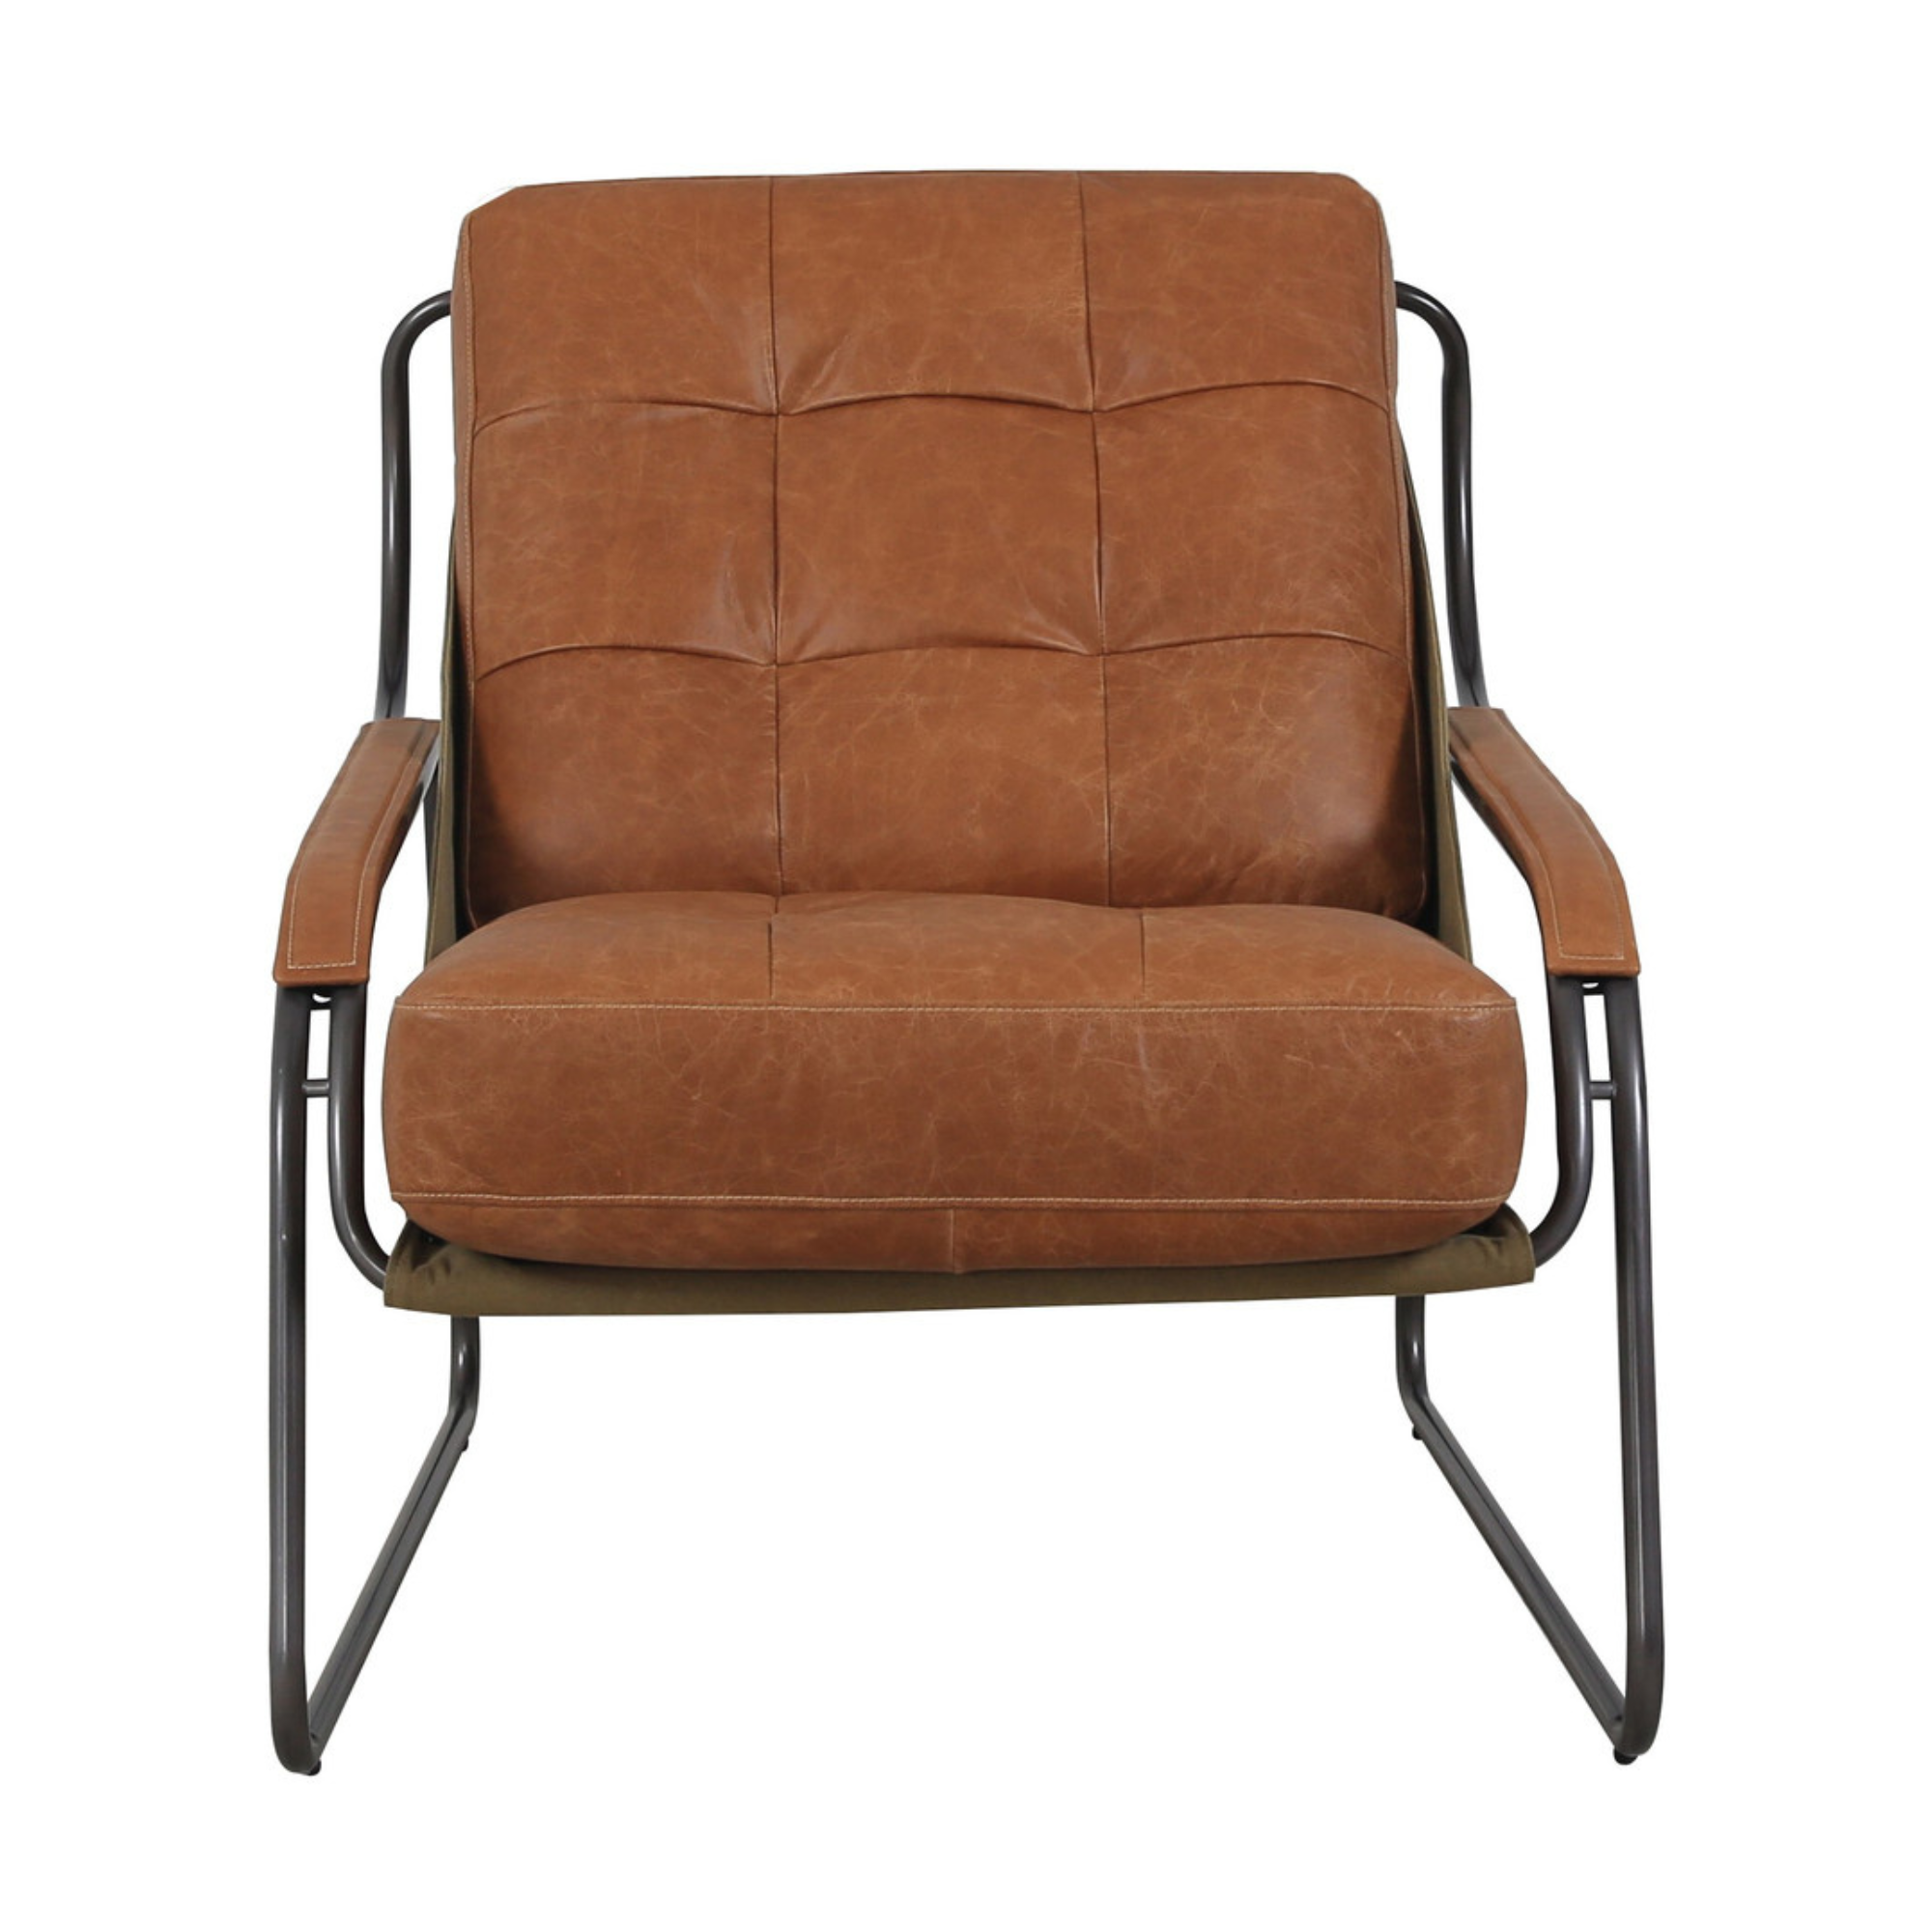 ZENITH LEATHER & CANVAS CHAIR